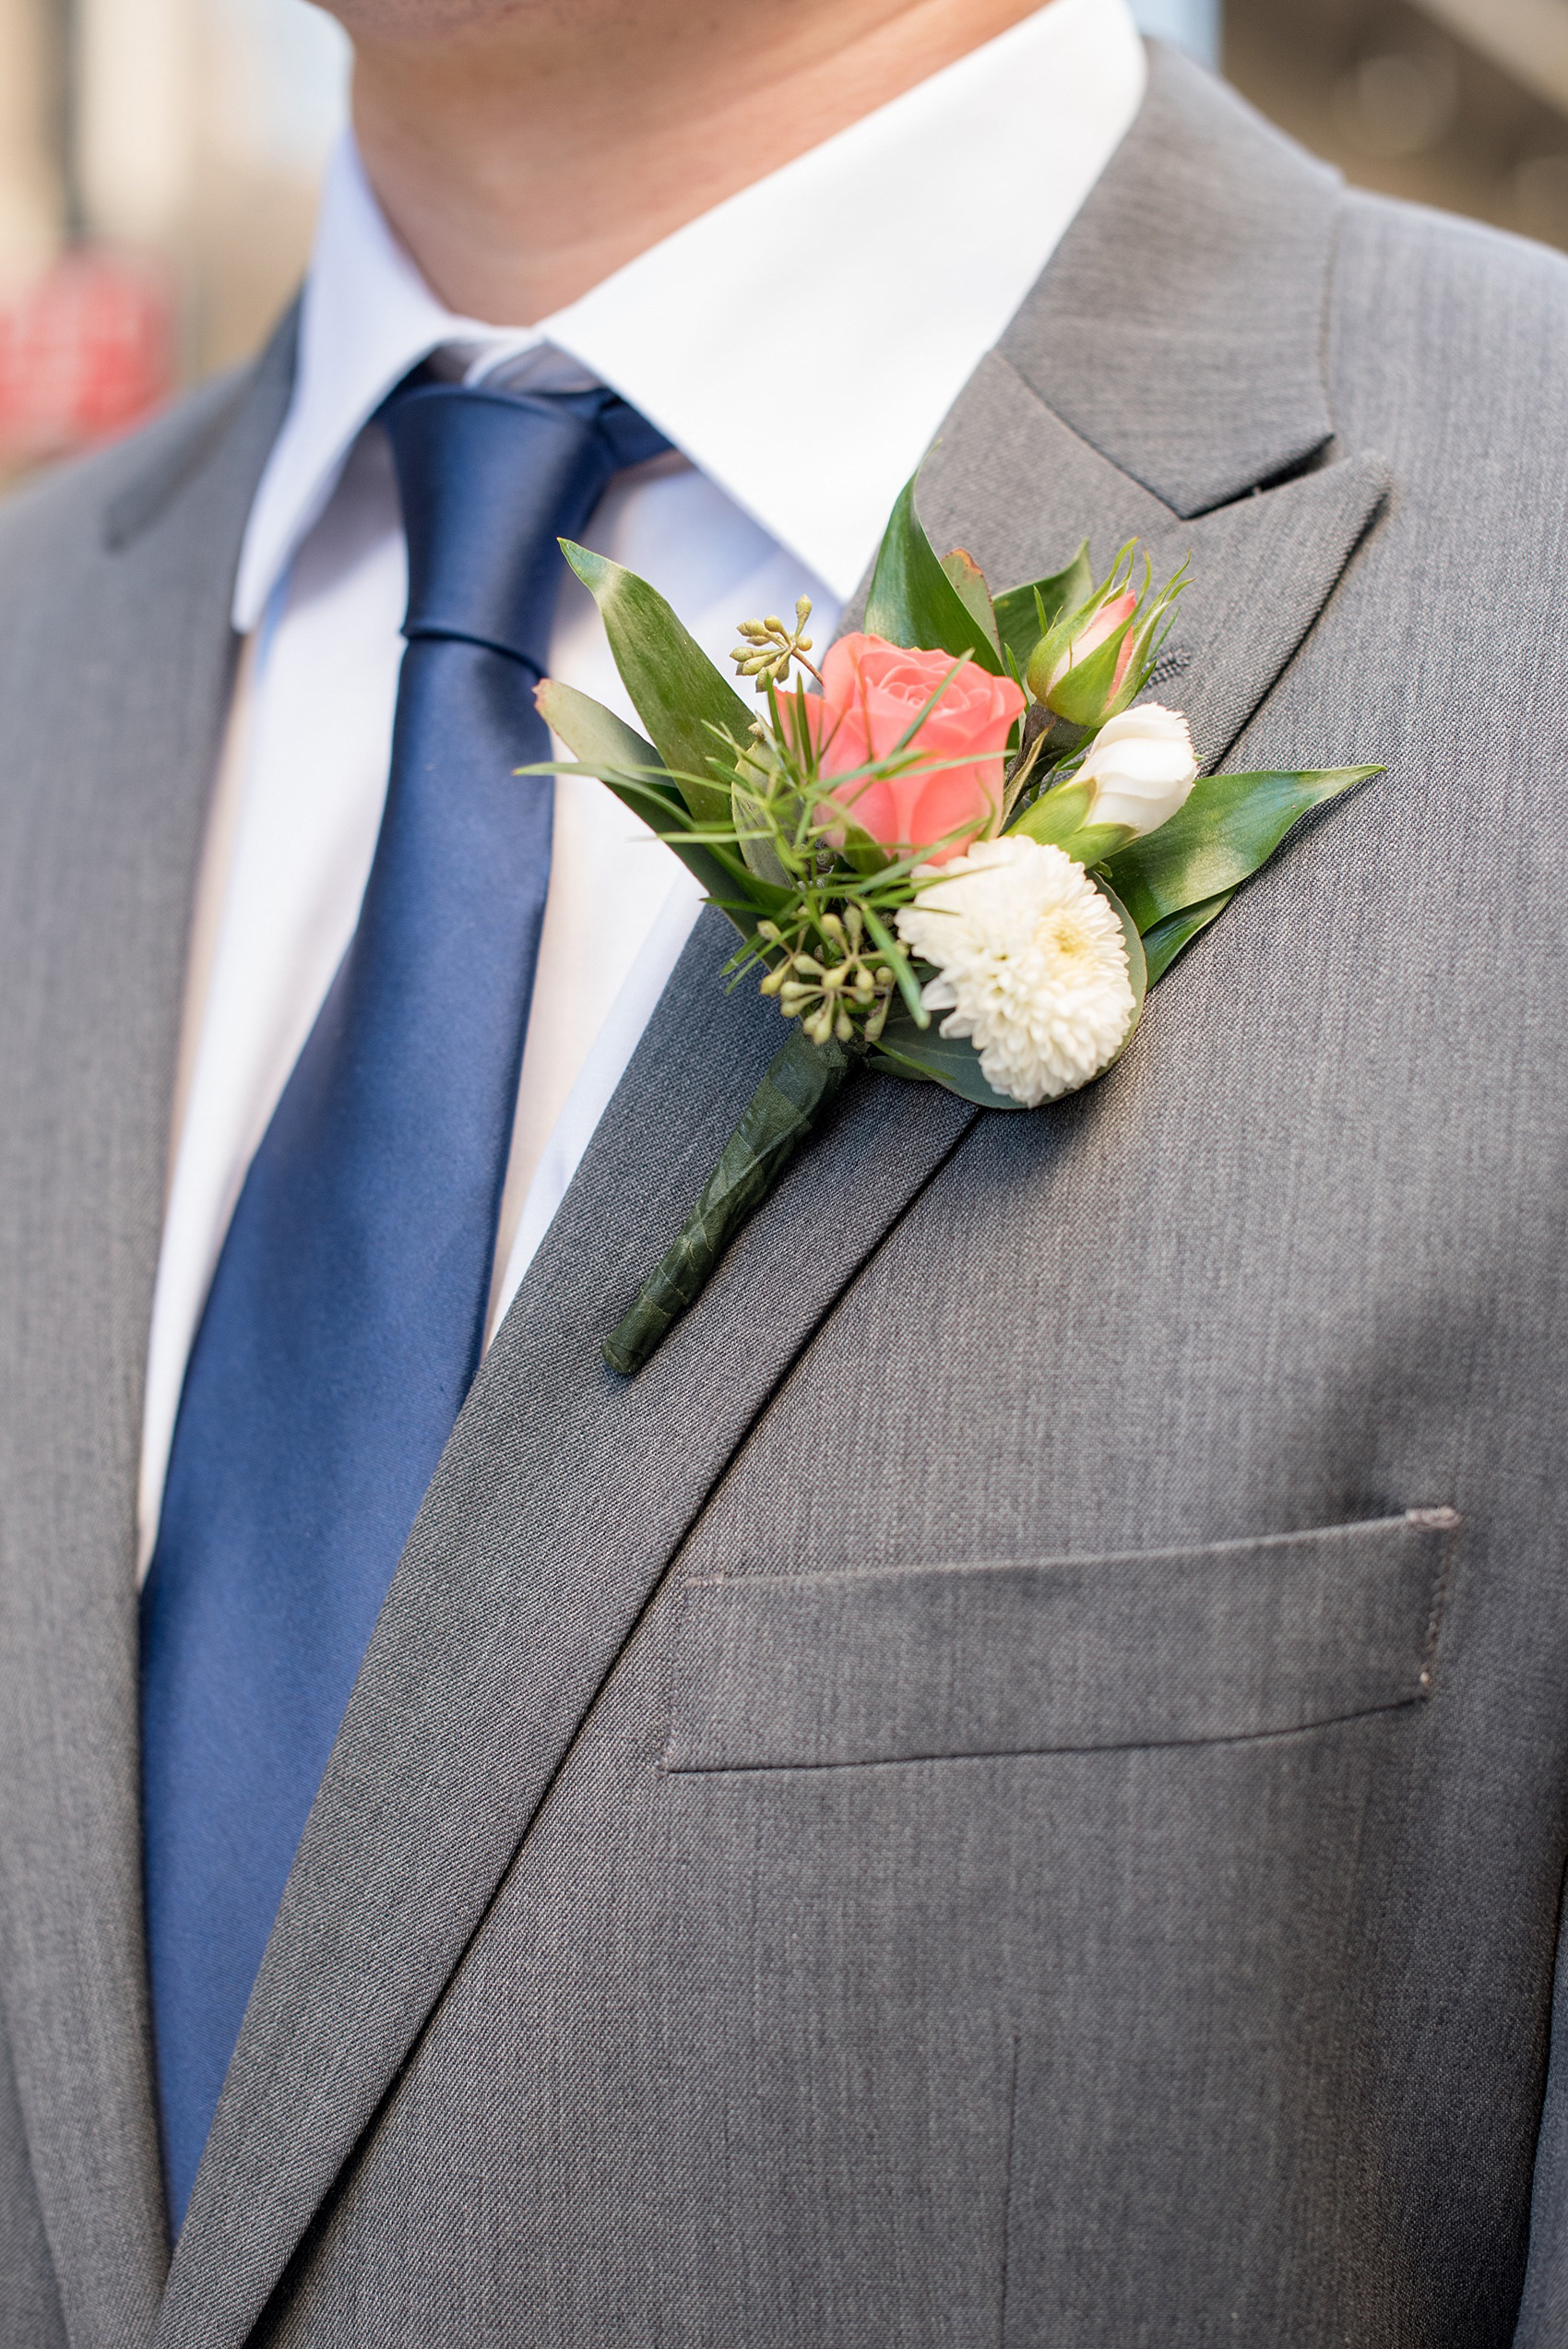 Mikkel Paige Photography photos from a fall wedding at The Stockroom at 230. A picture of the groomsmen boutonnieres with coral and white flowers.